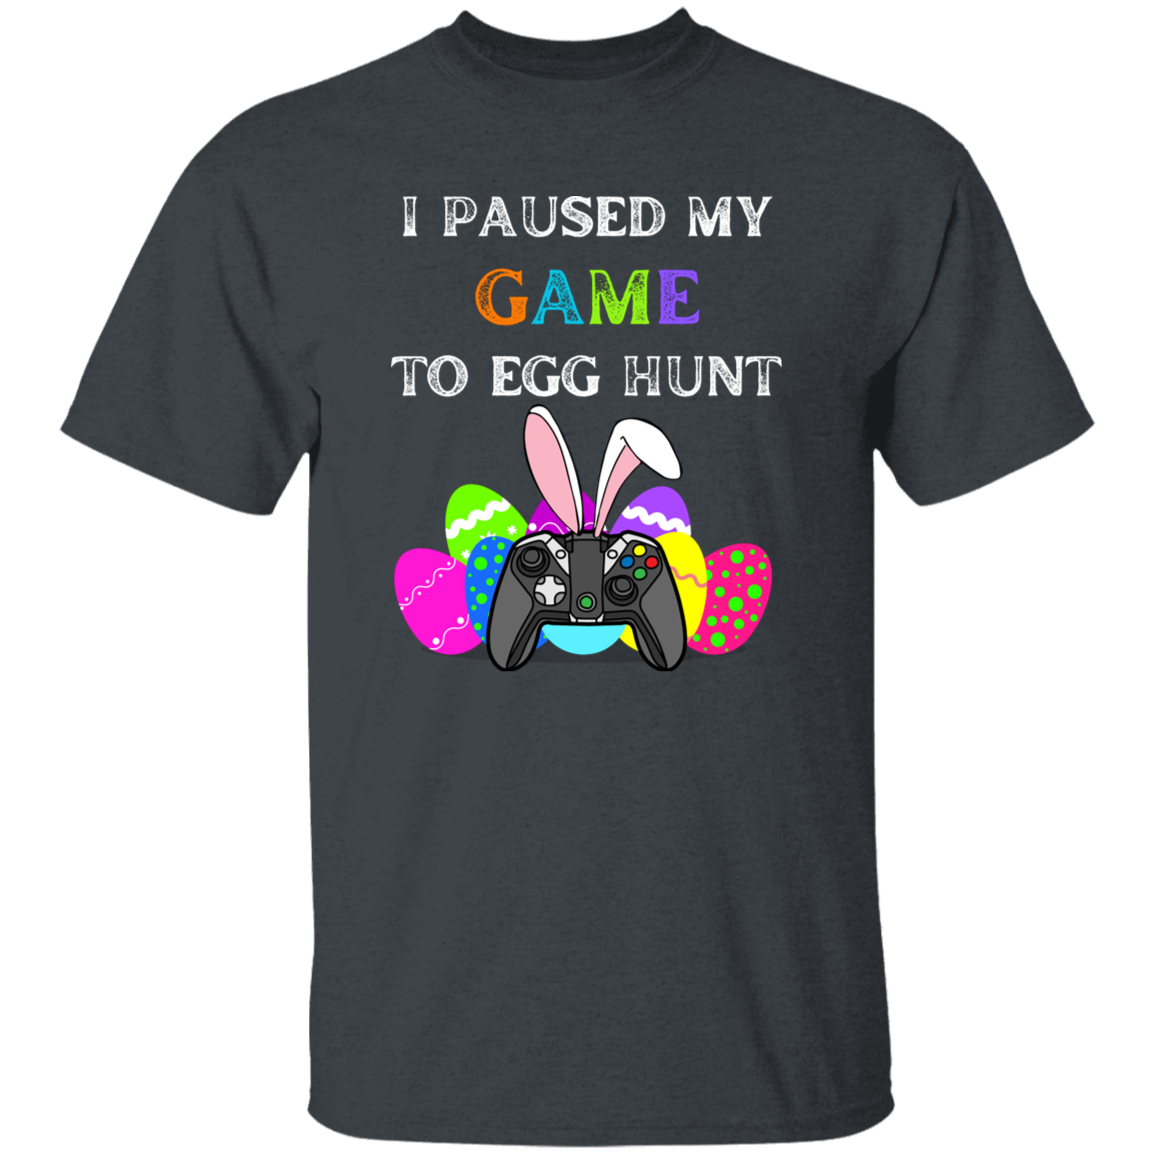 Paused Game to Egg Hunt Youth 5.3 oz 100% Cotton T-Shirt